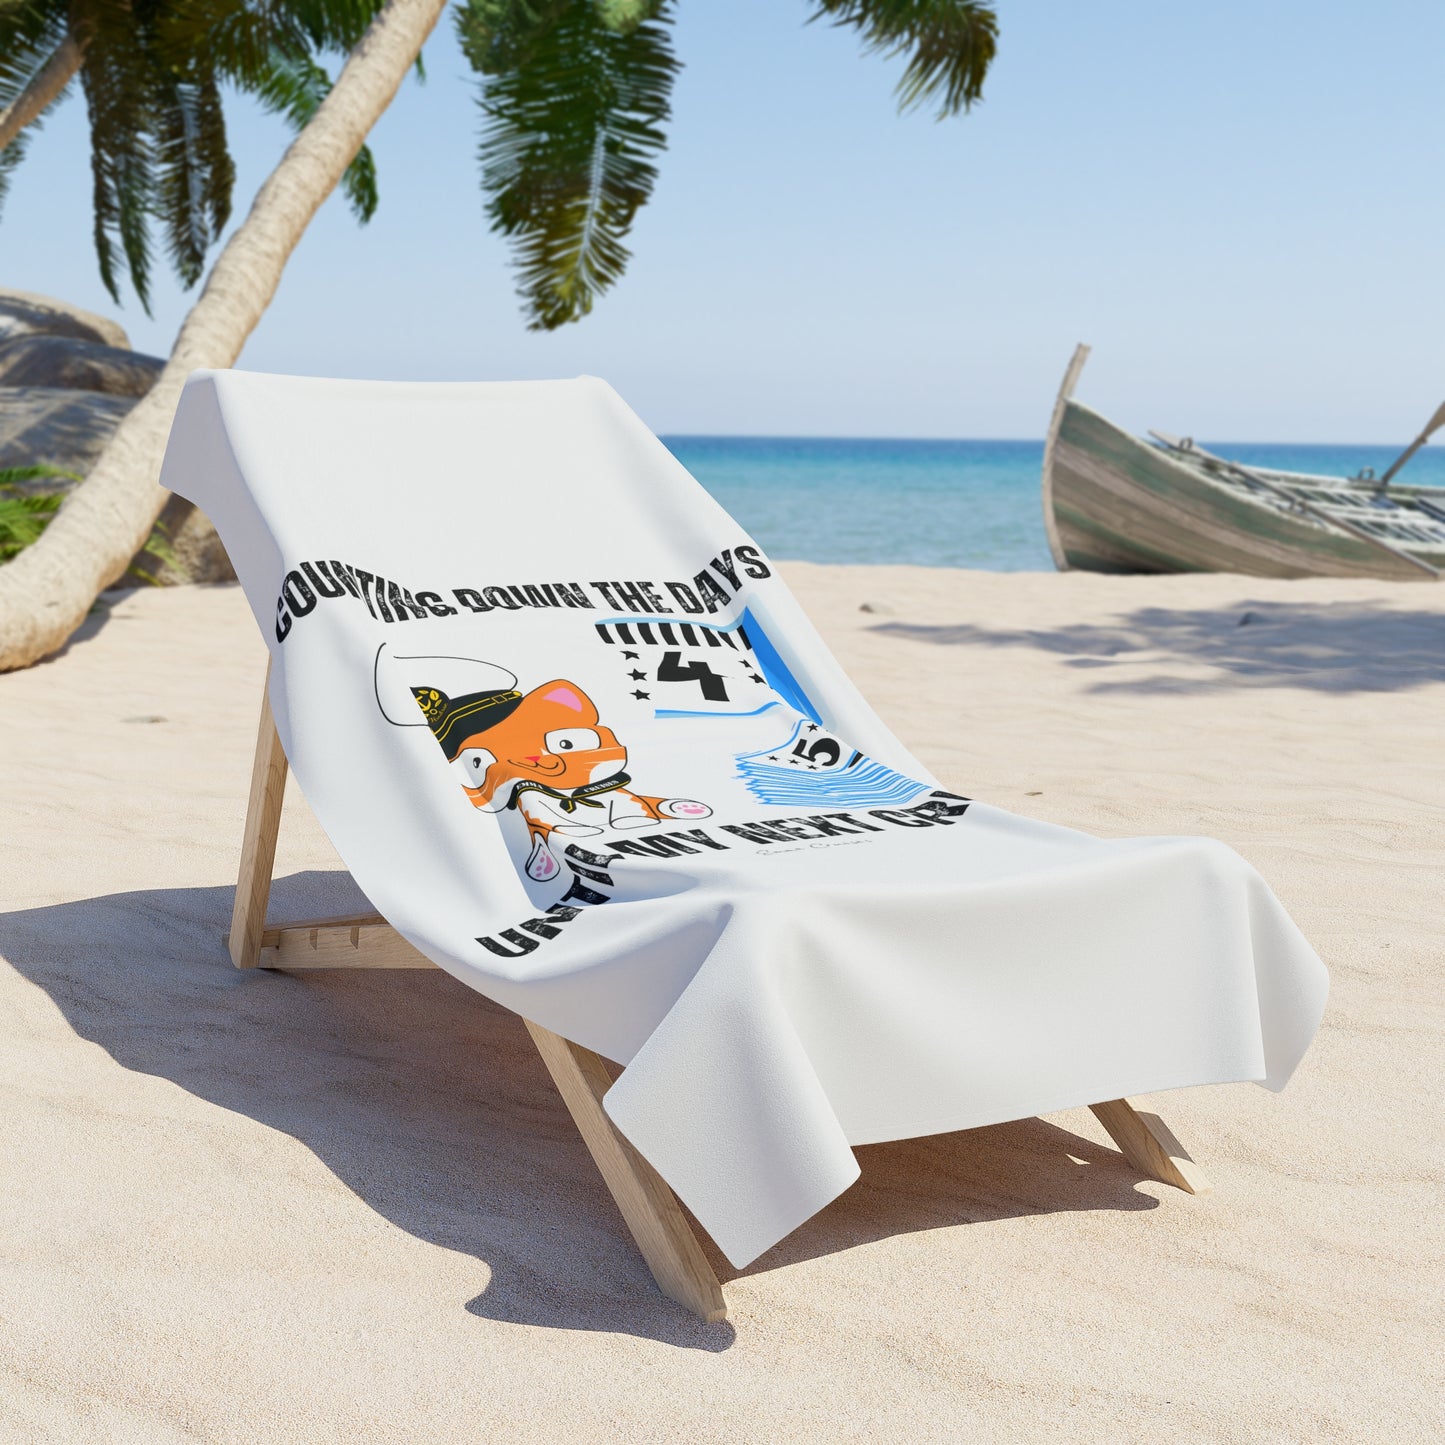 Counting Down the Days - Beach Towel